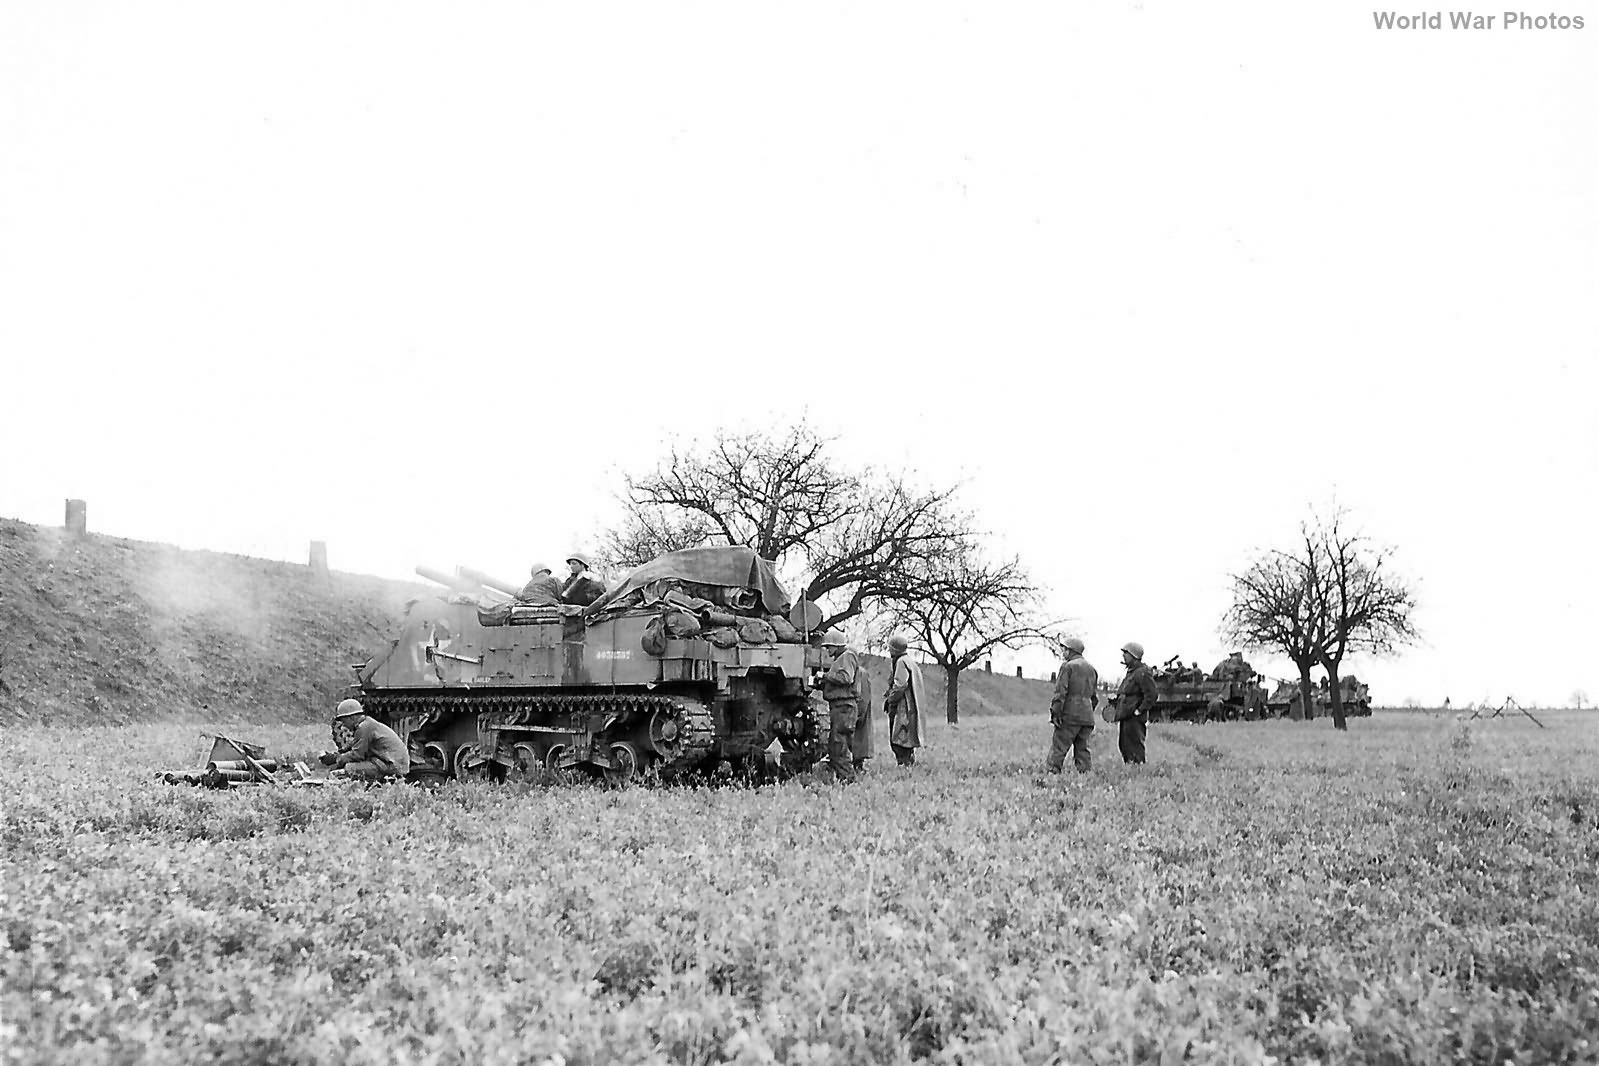 M7 of 10th Armored Division firing near Heidelberg 30 March 1945